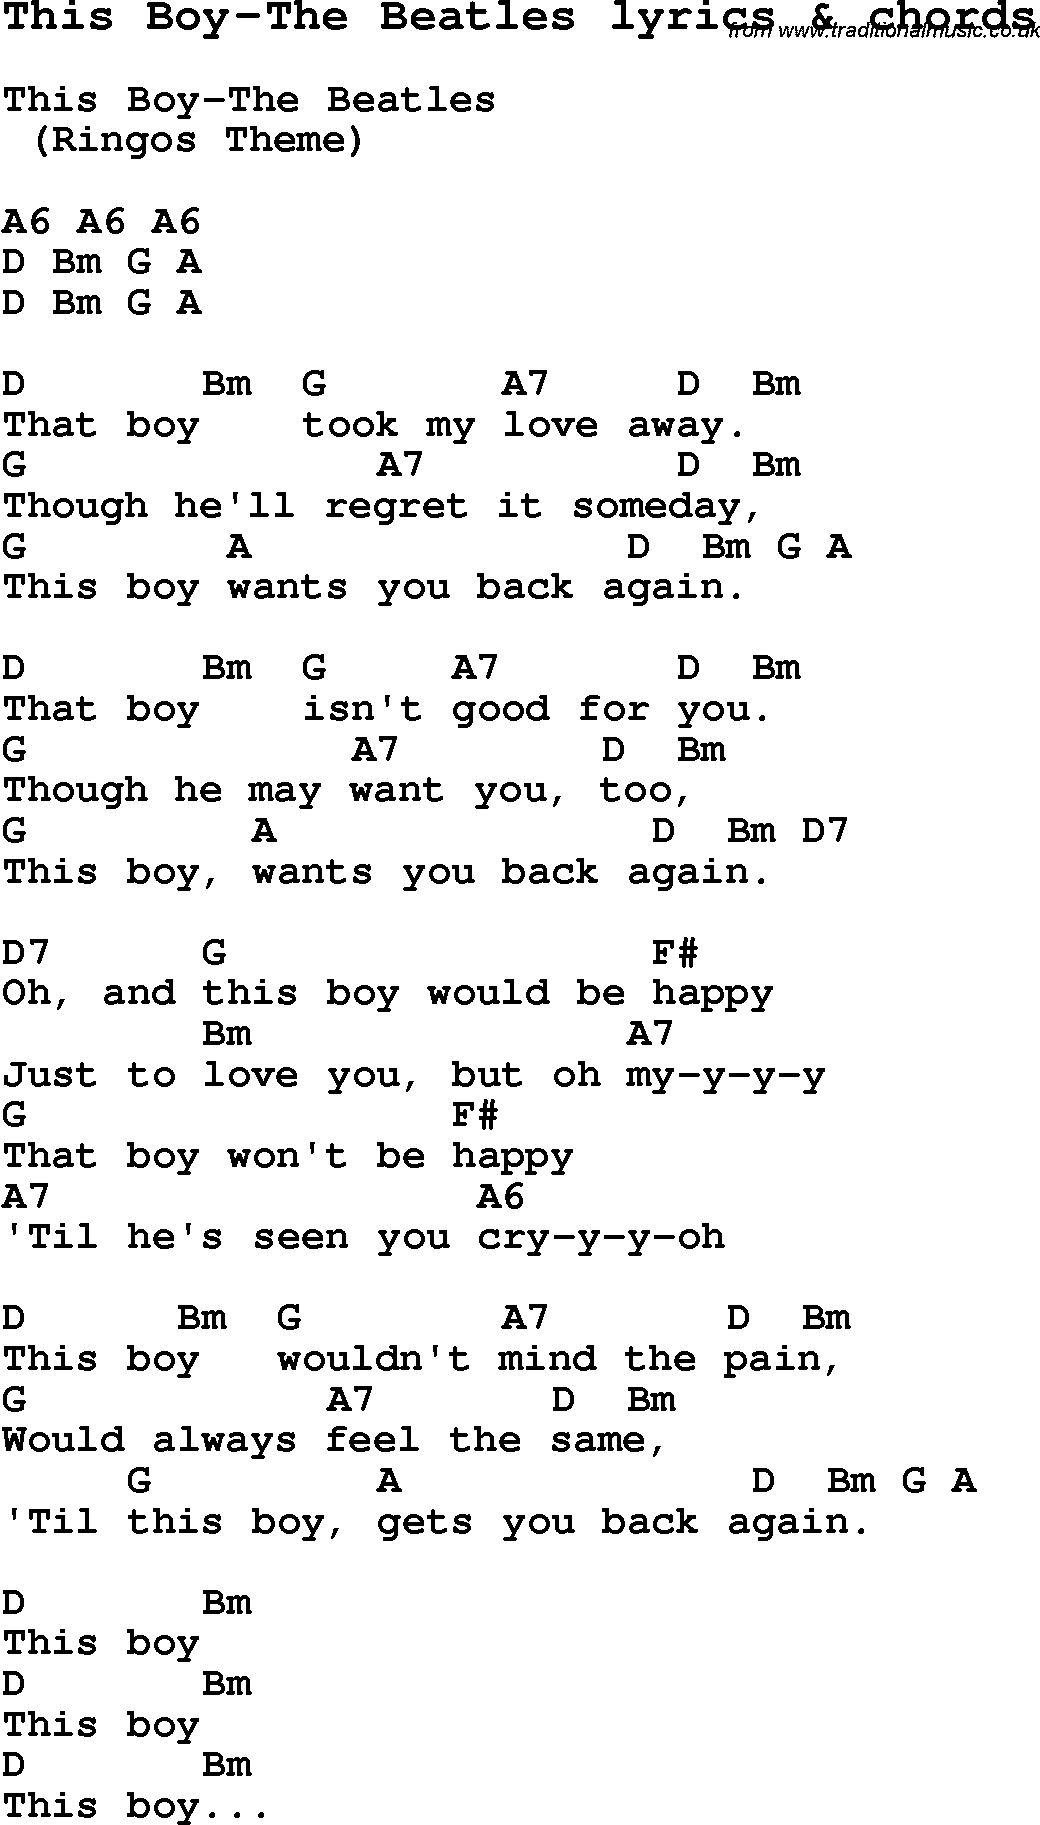 Love Song Lyrics for: This Boy-The Beatles with chords for Ukulele, Guitar Banjo etc.